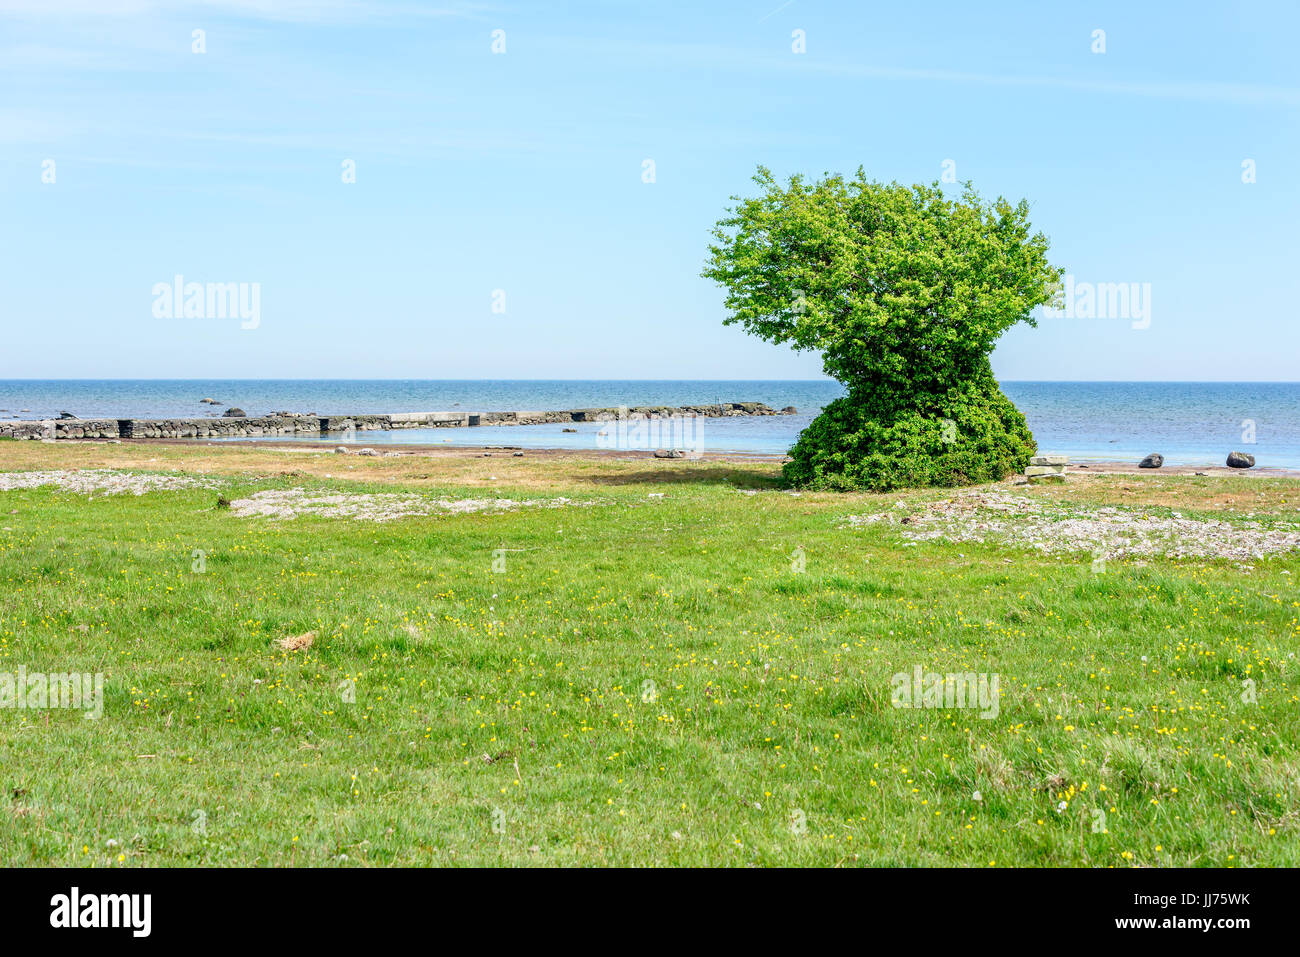 Strange and solitary tree growing on beach. Tree is overgrown with leaves from top to bottom. Stock Photo